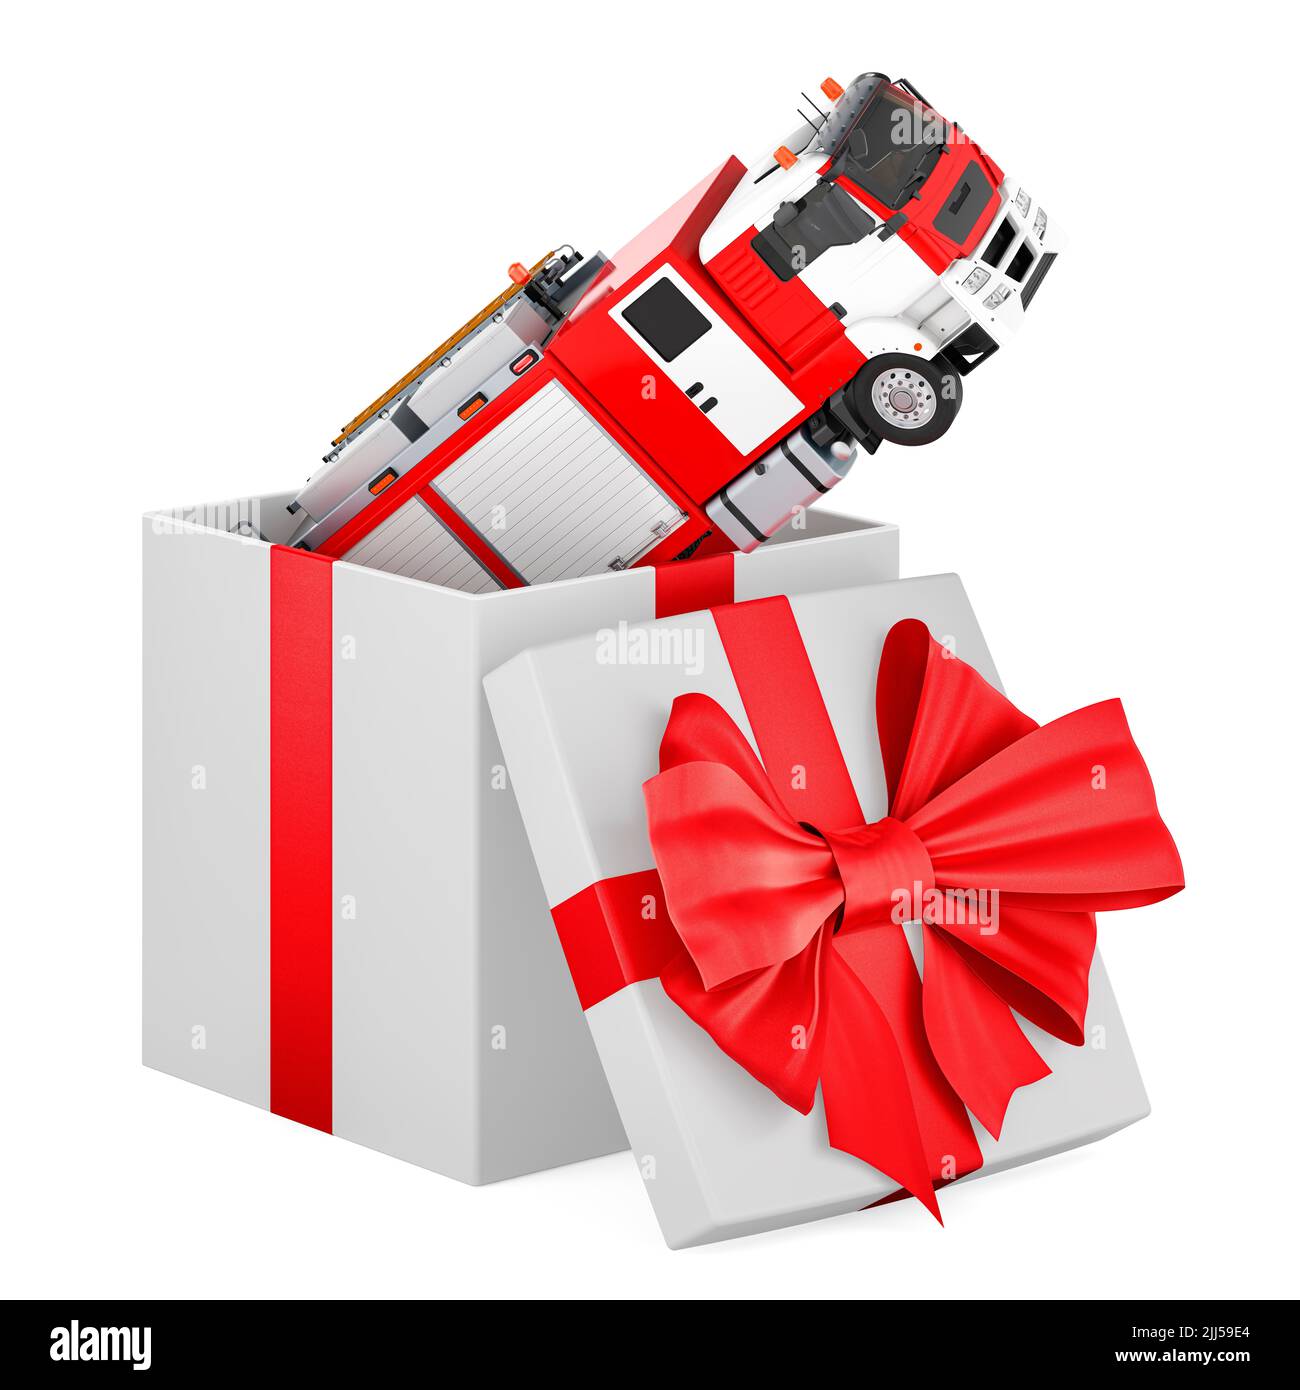 Fire engine inside gift box, present concept. 3D rendering isolated on white background Stock Photo